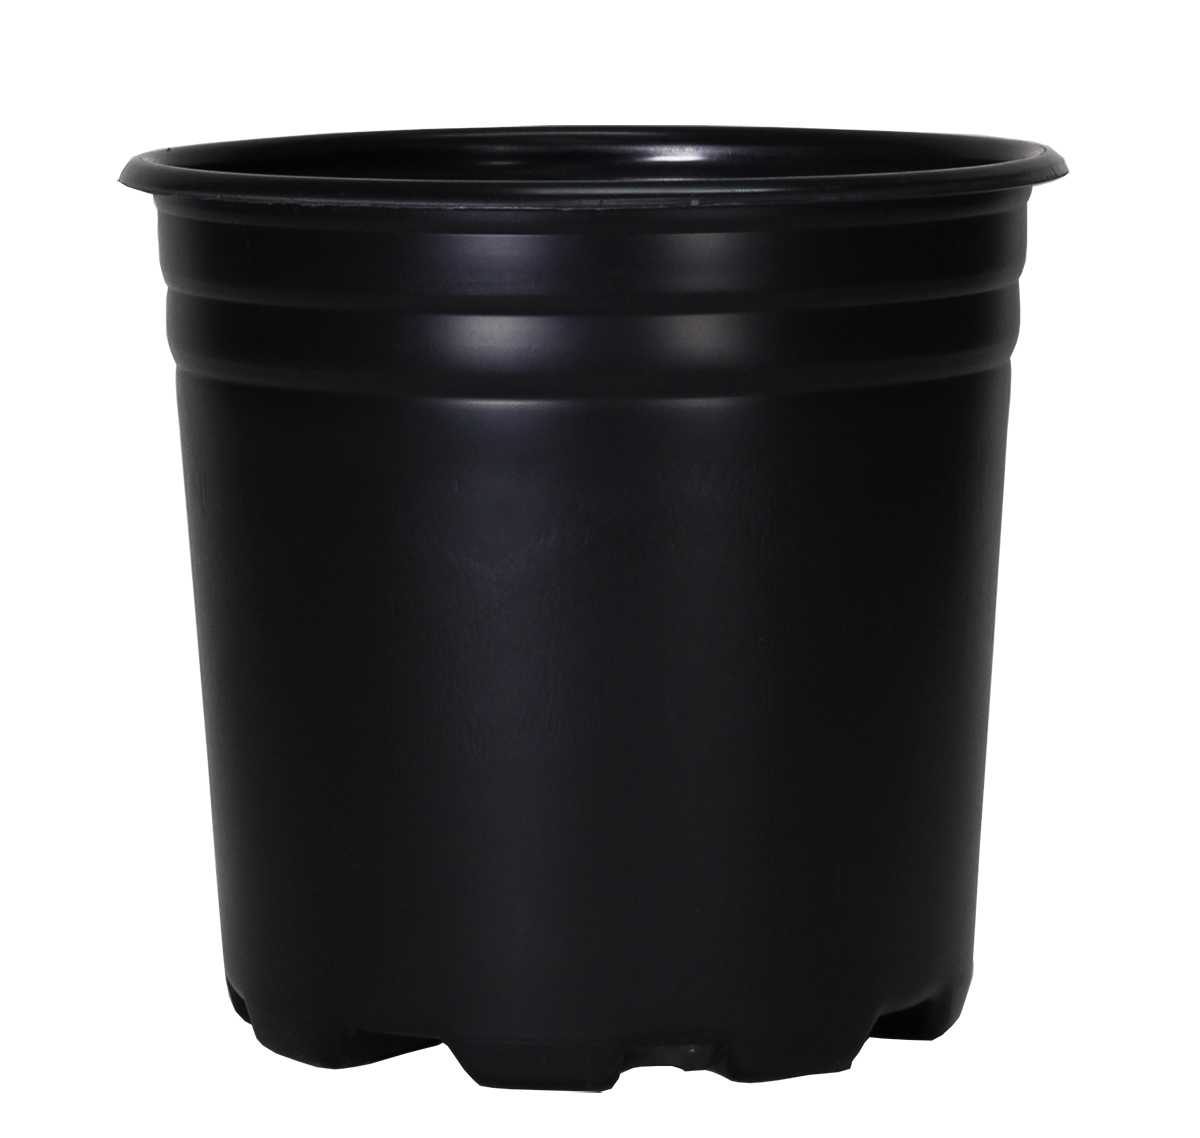 Picture for Pro Cal Thermo Pot, 2 gal